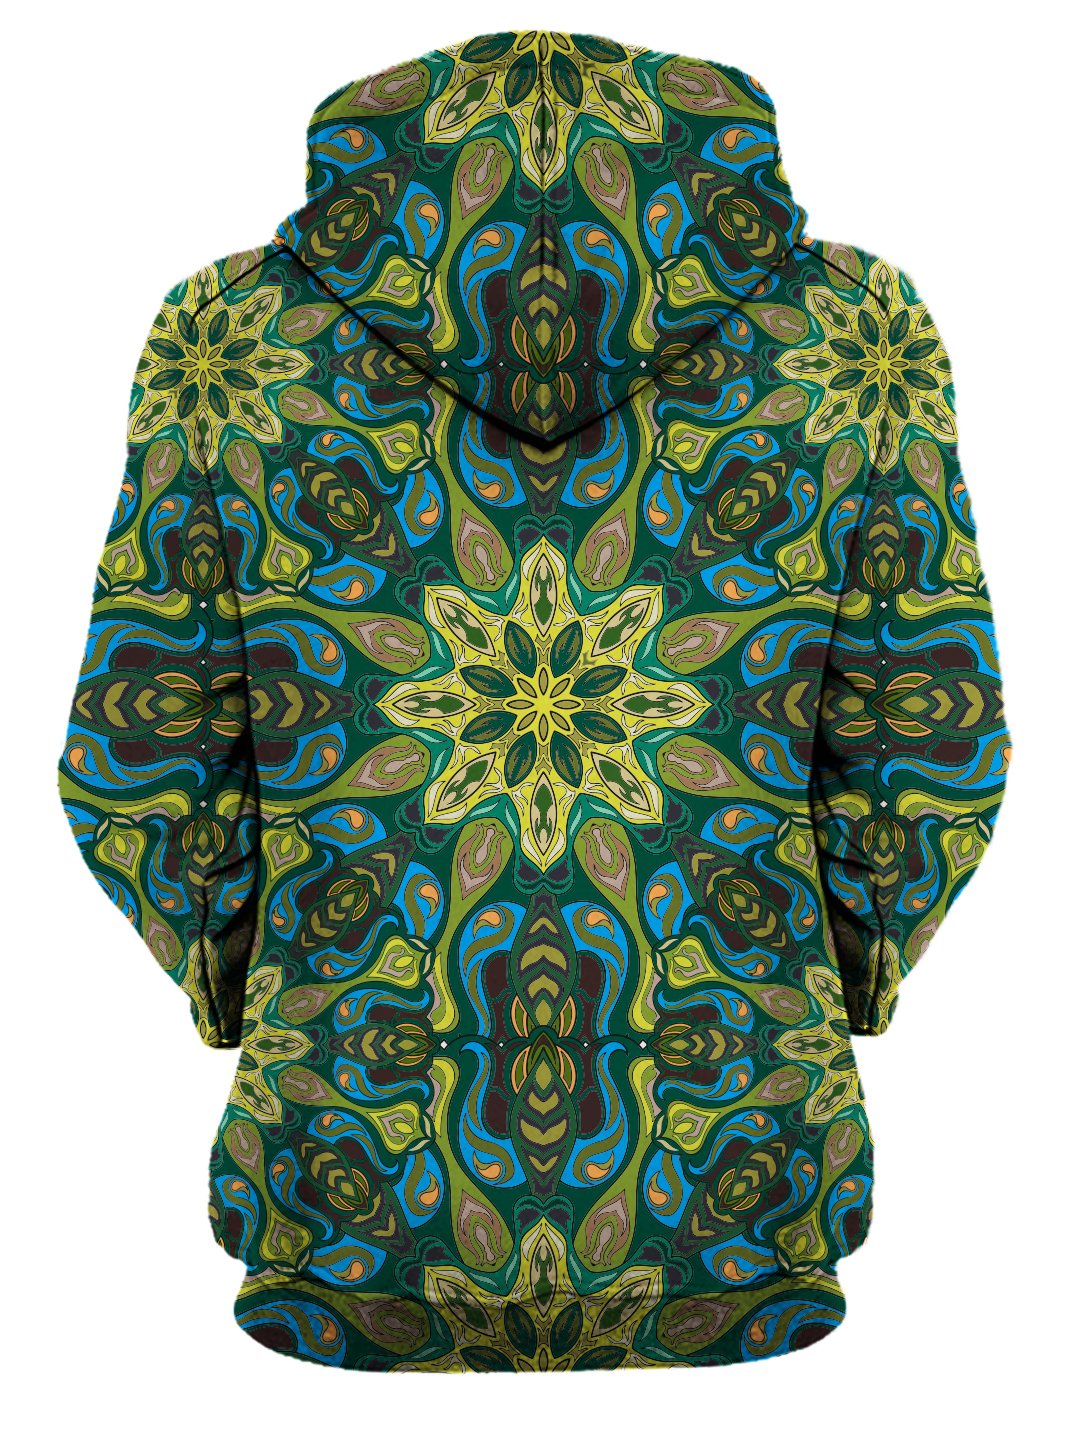 Rear of women's all over print green & blue psychedelic mandala hoody. 